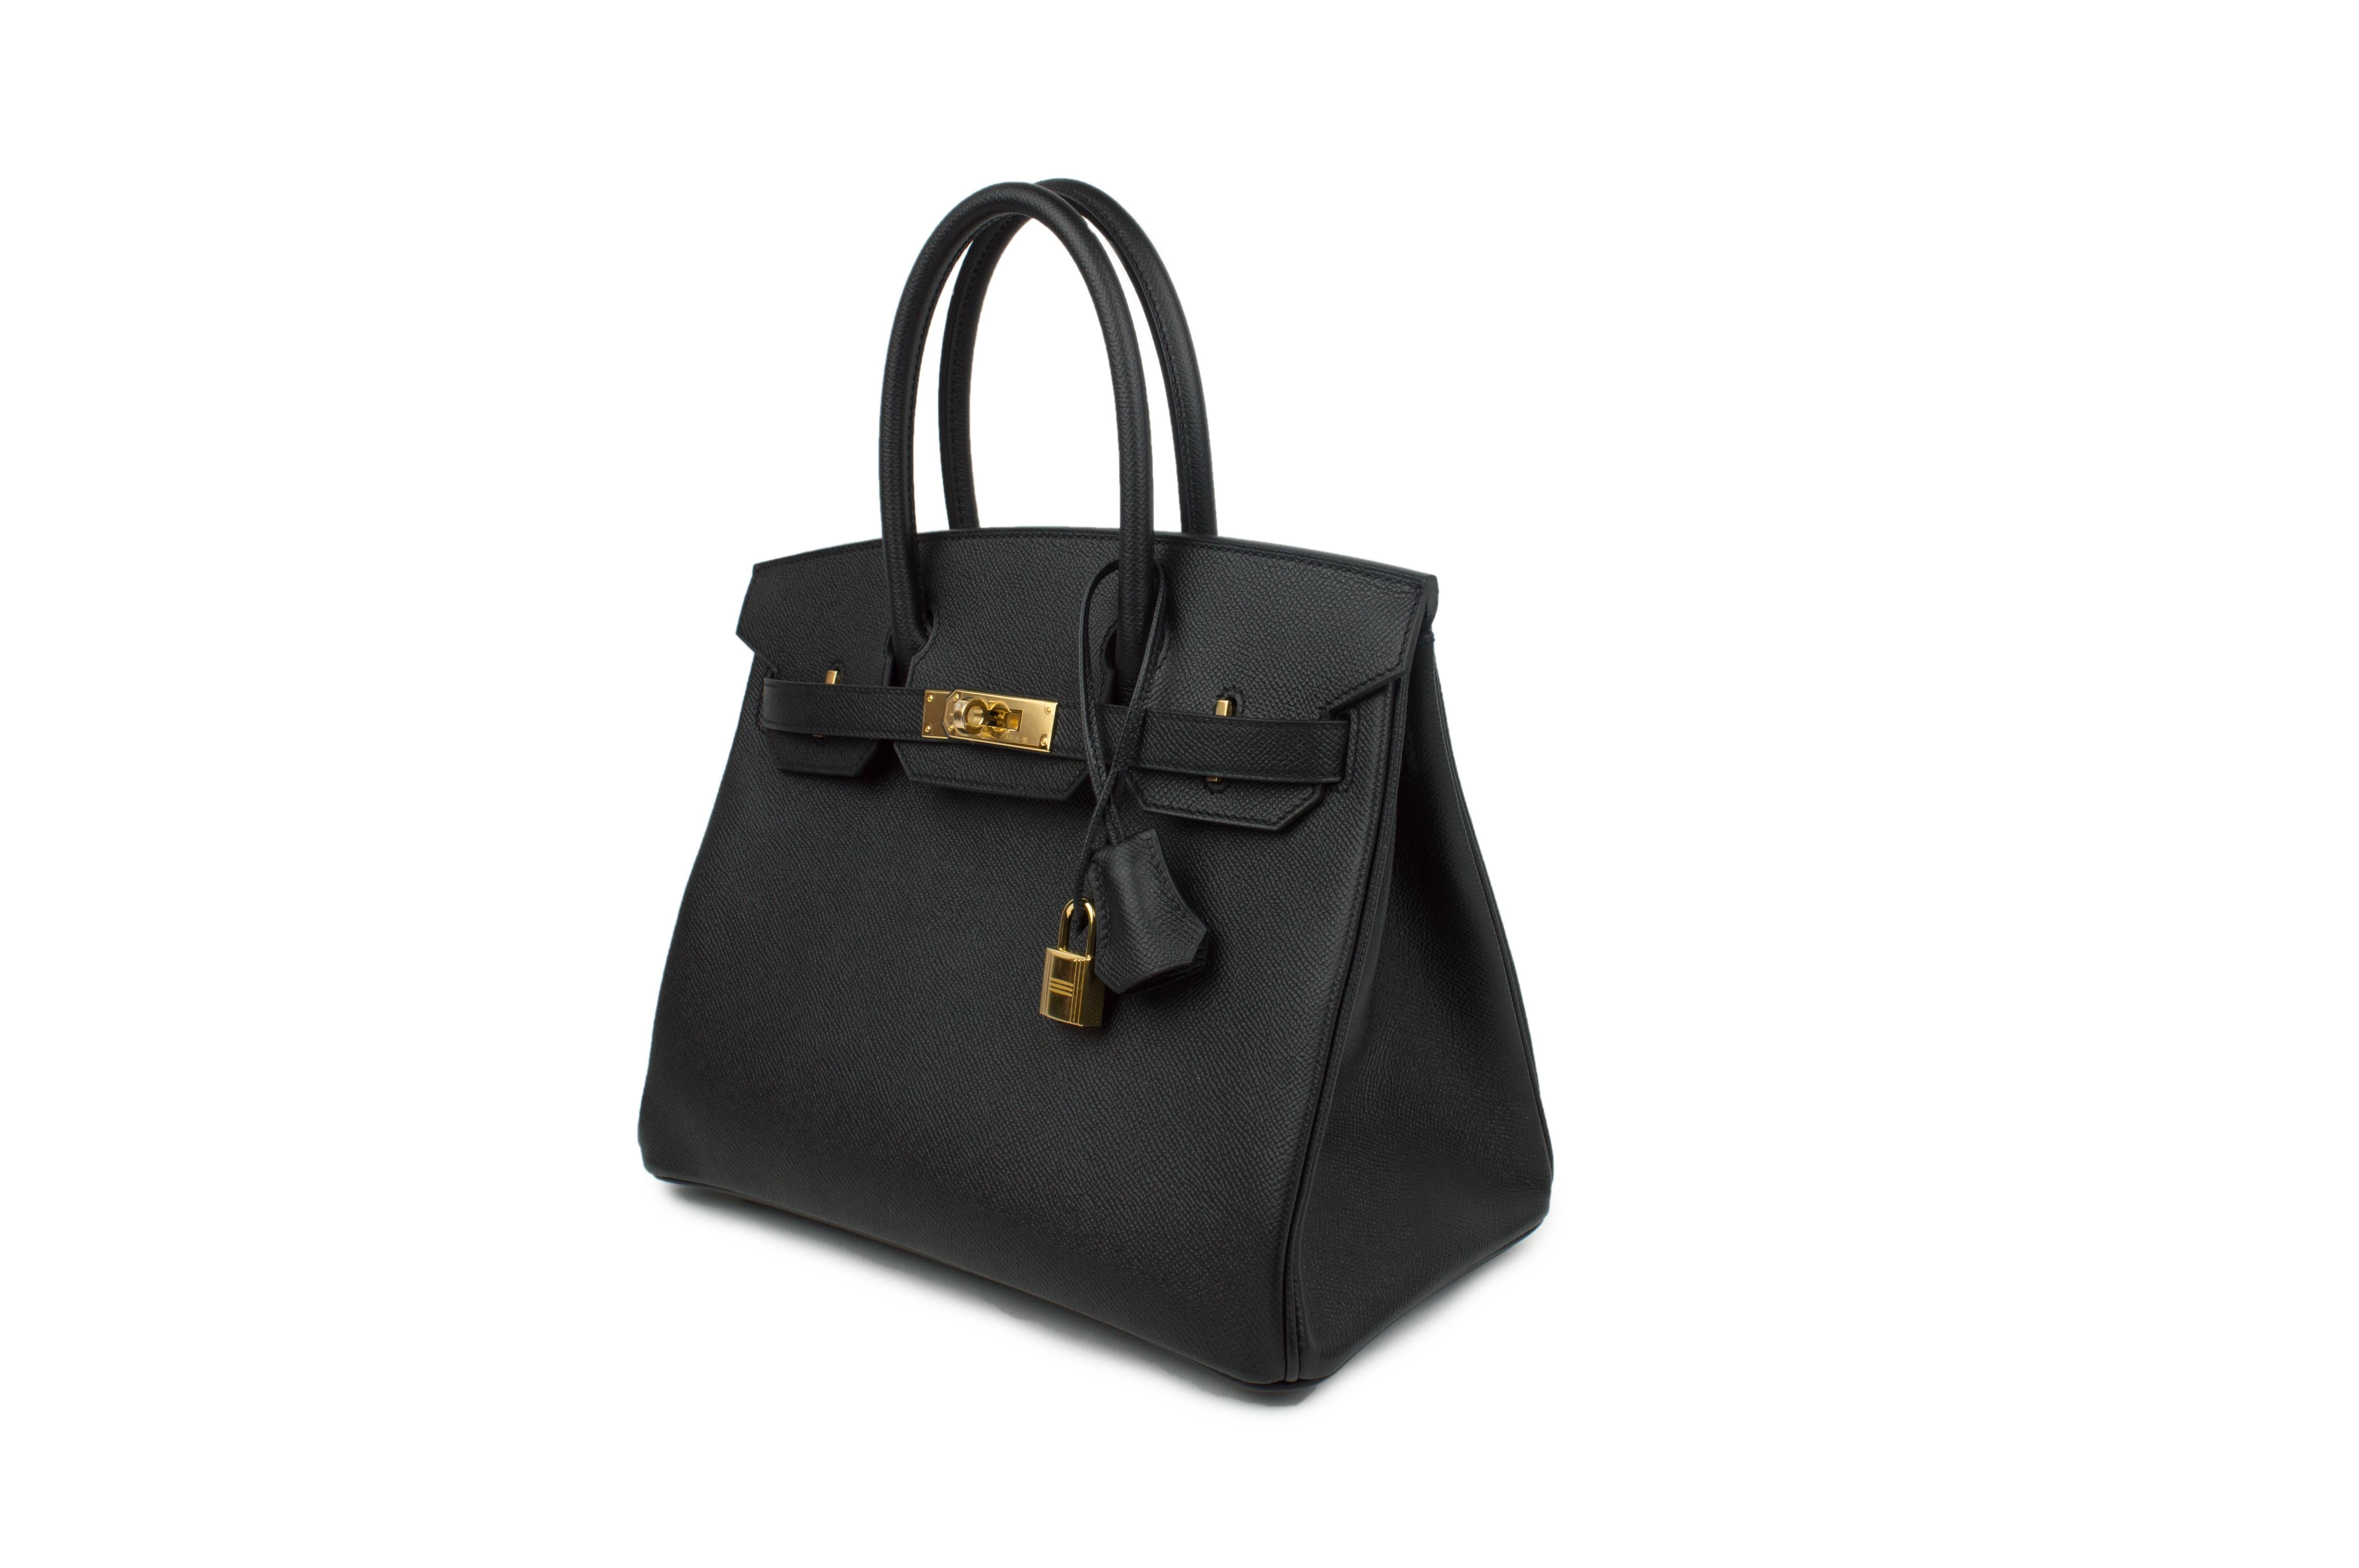 Become an owner of perfect solid hard calfskin Hermes Birkin 30 Black Epsom Gold Hardware Stamp A (2017) purse. As the most demanded fashion bag in the world it helps you pay attention to wherever you go. This product is made of smooth well-known